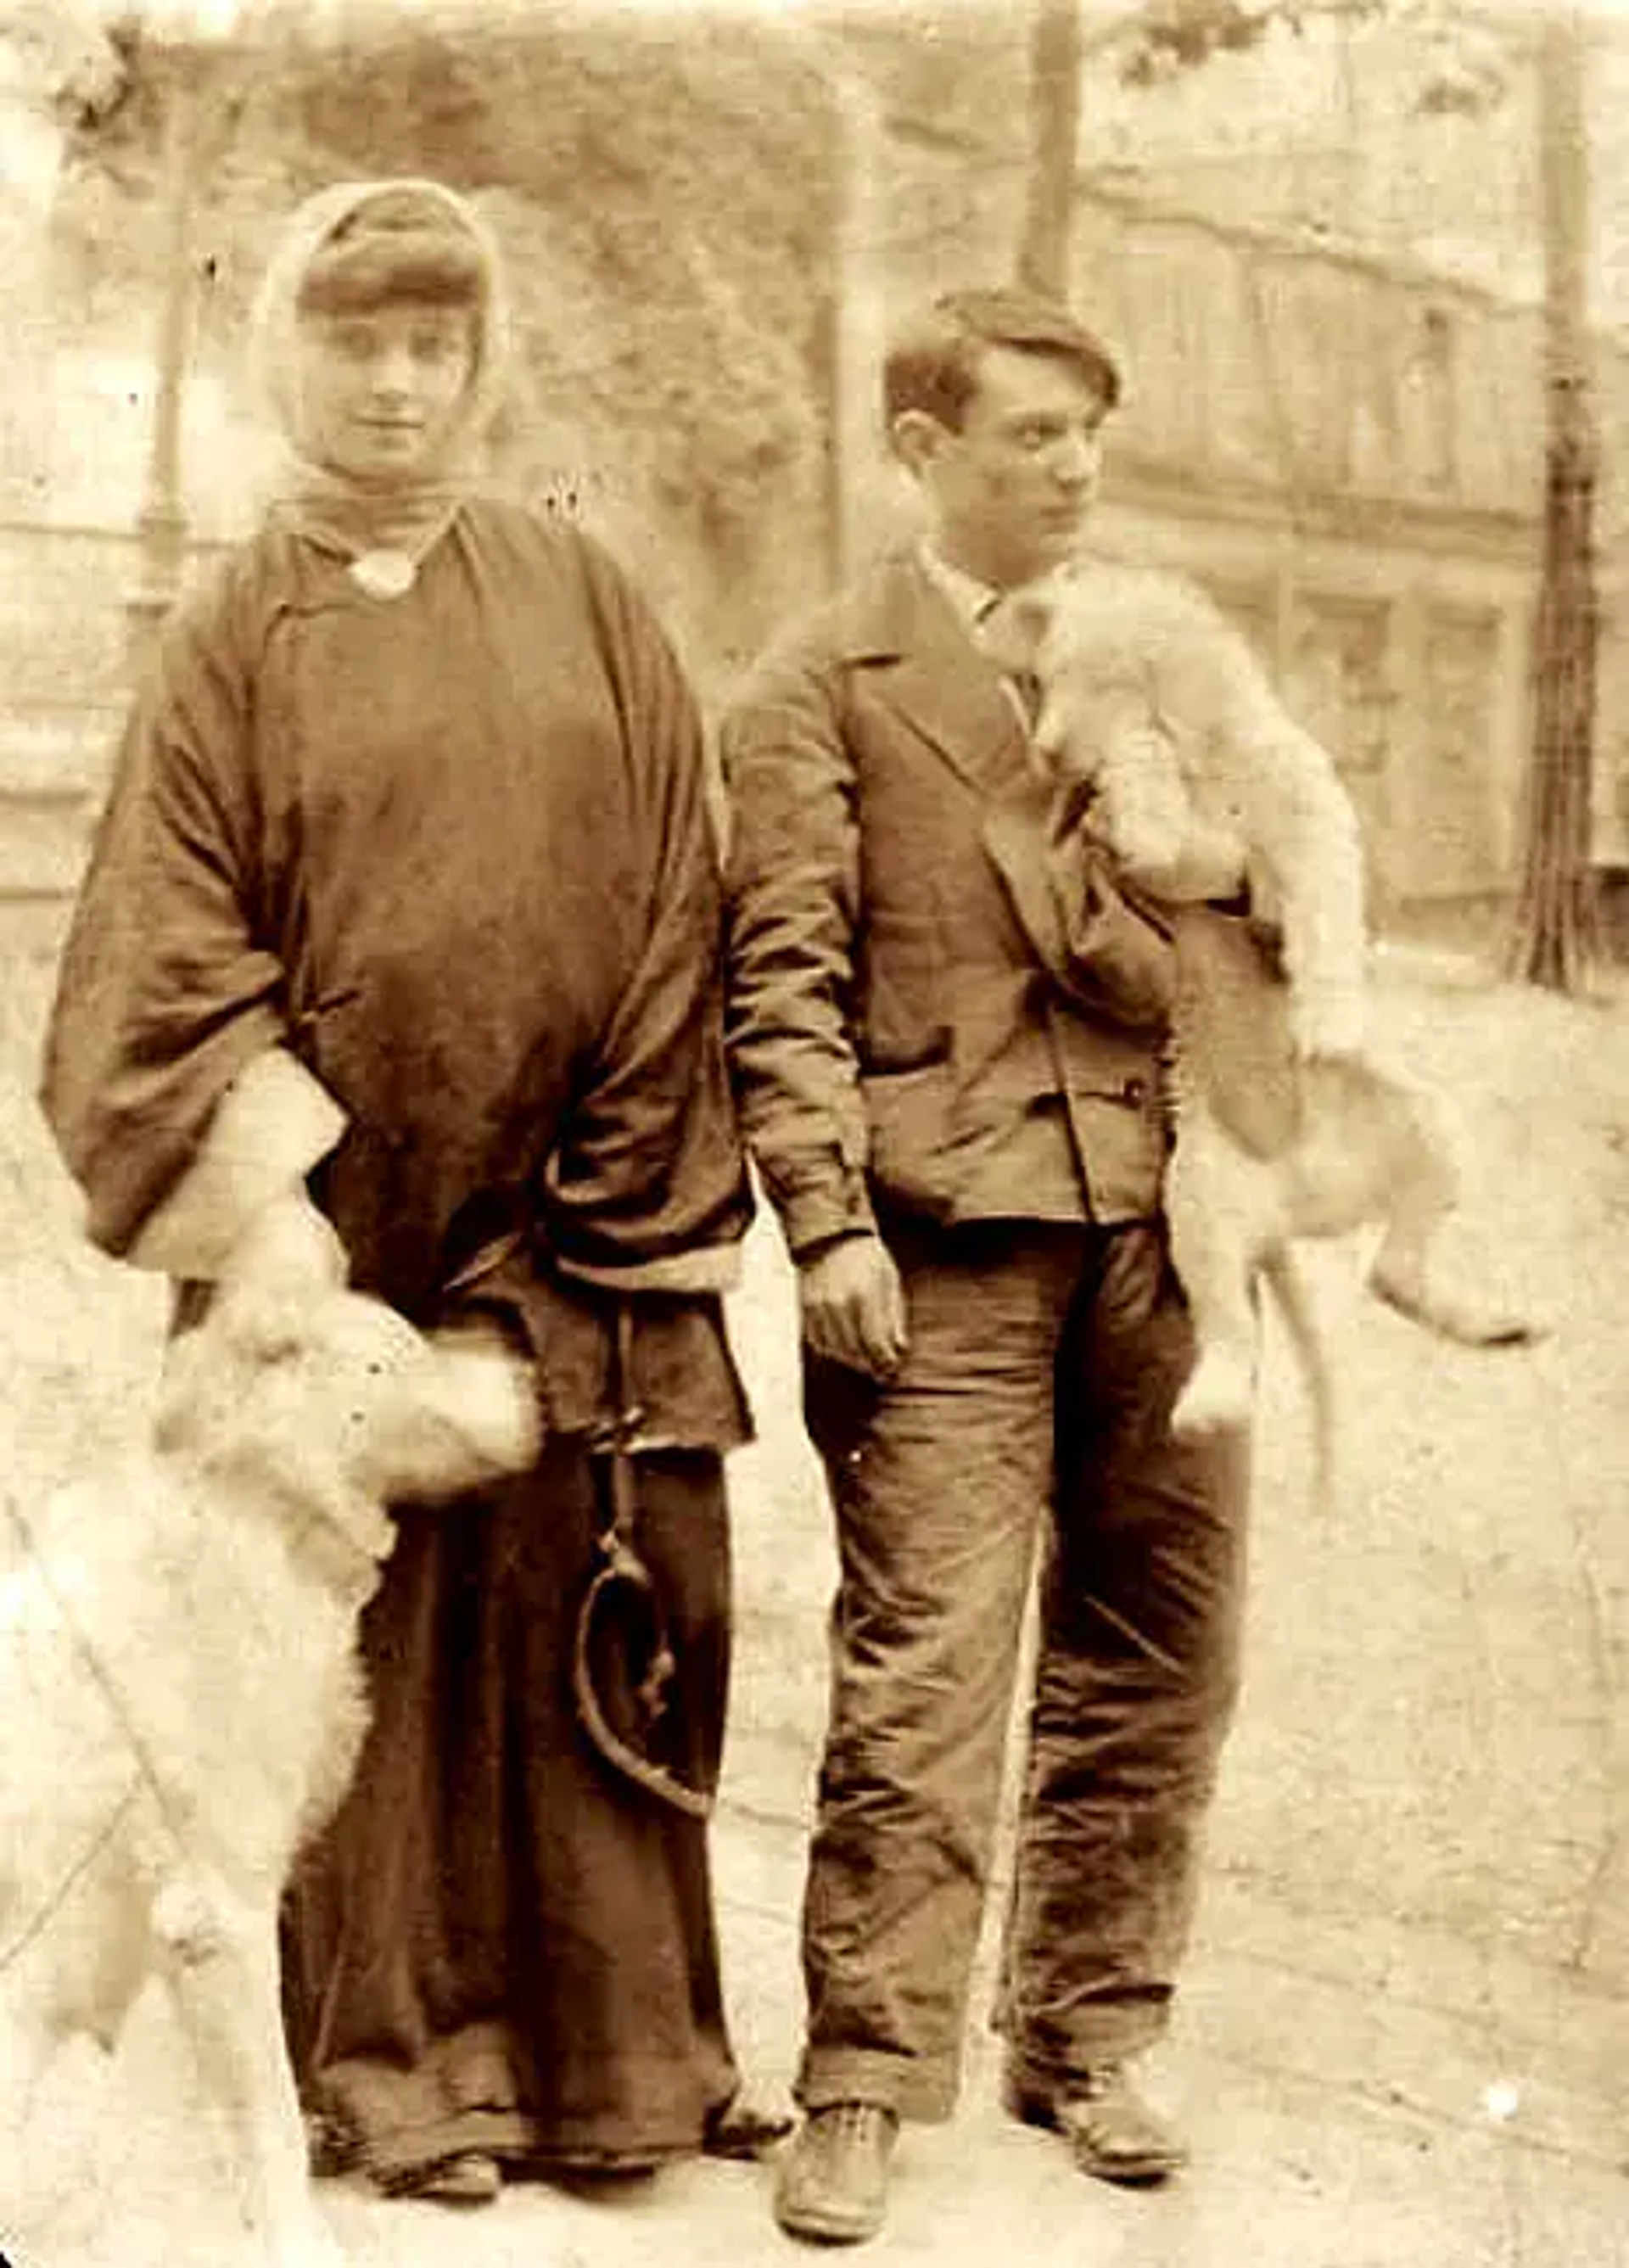 An old, sepia-tone image of the artist Pablo Picasso alongside his muse Fernande Olivier.